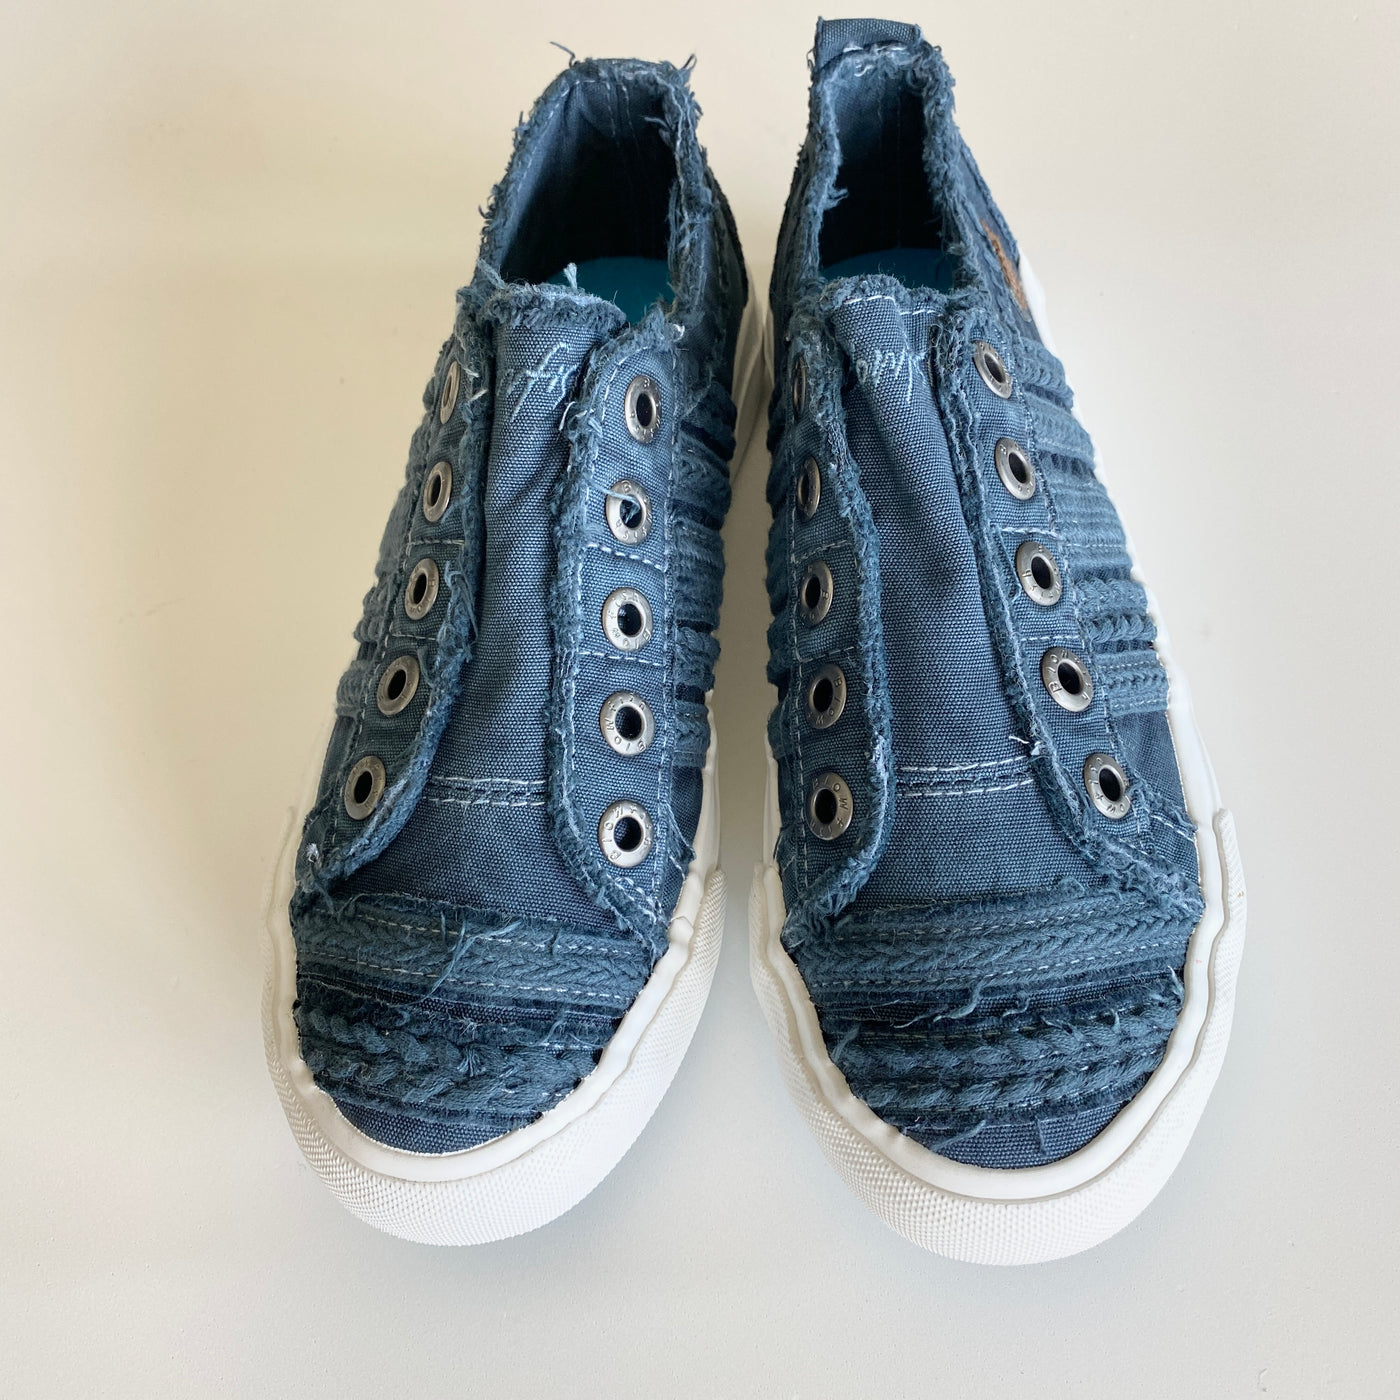 Parlane Sneakers by Blowfish in Bento Blue